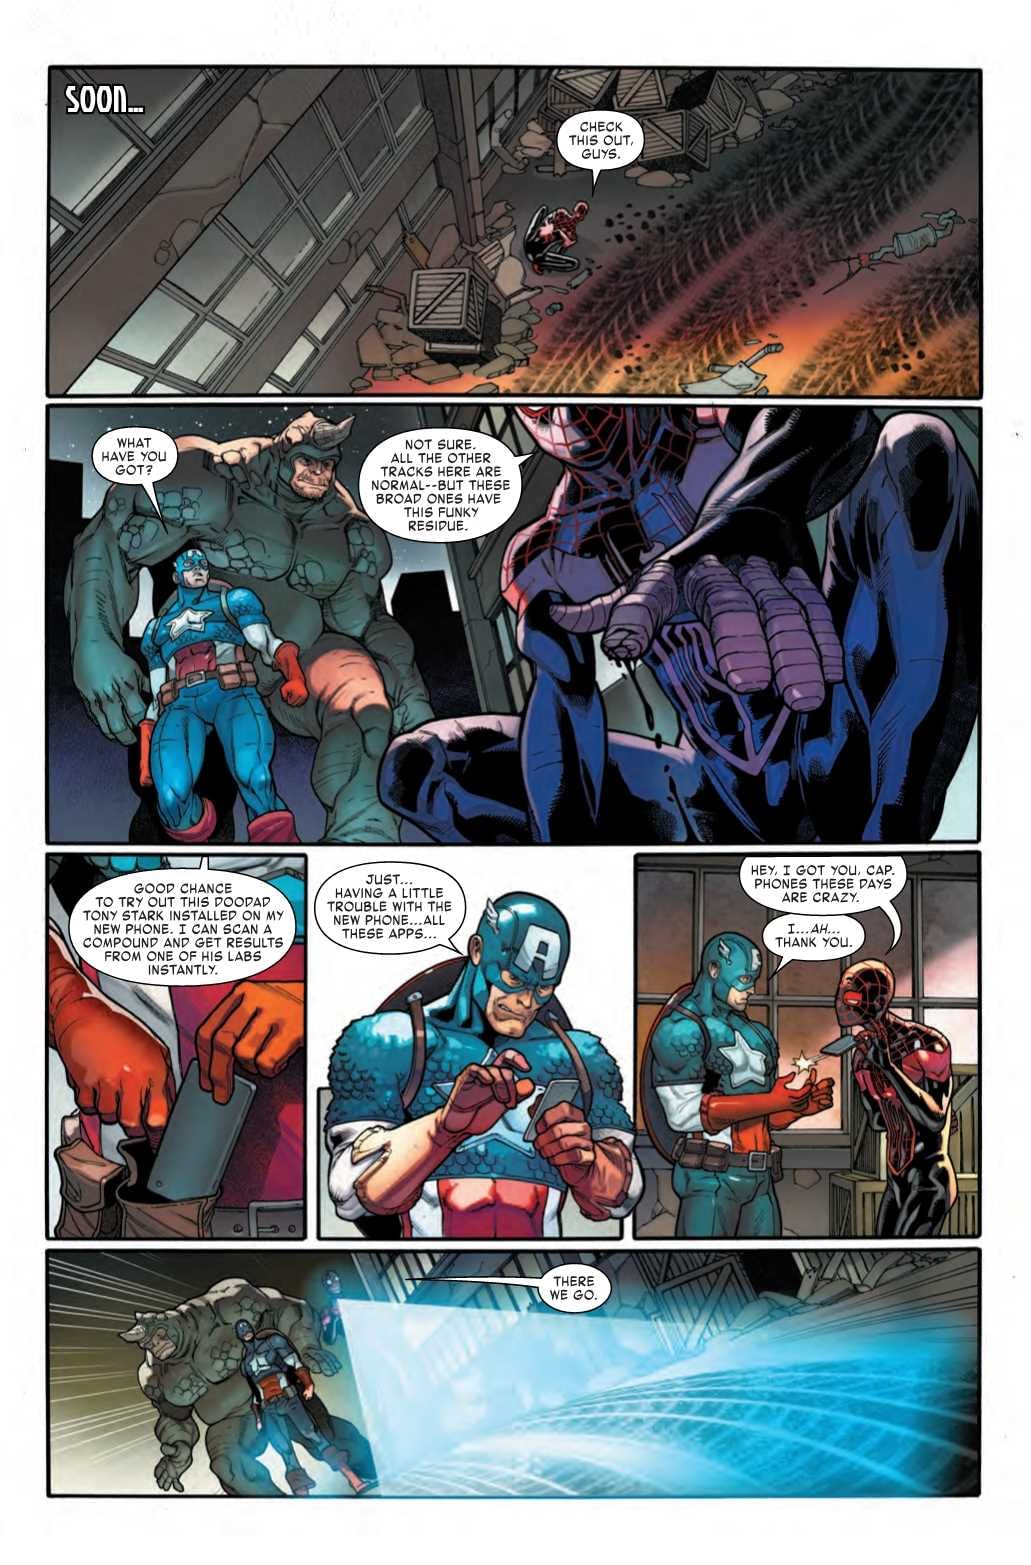 Do House Democrats Now Have Captain America Powers? Next Week's Miles Morales Spider-Man #3 (Preview)